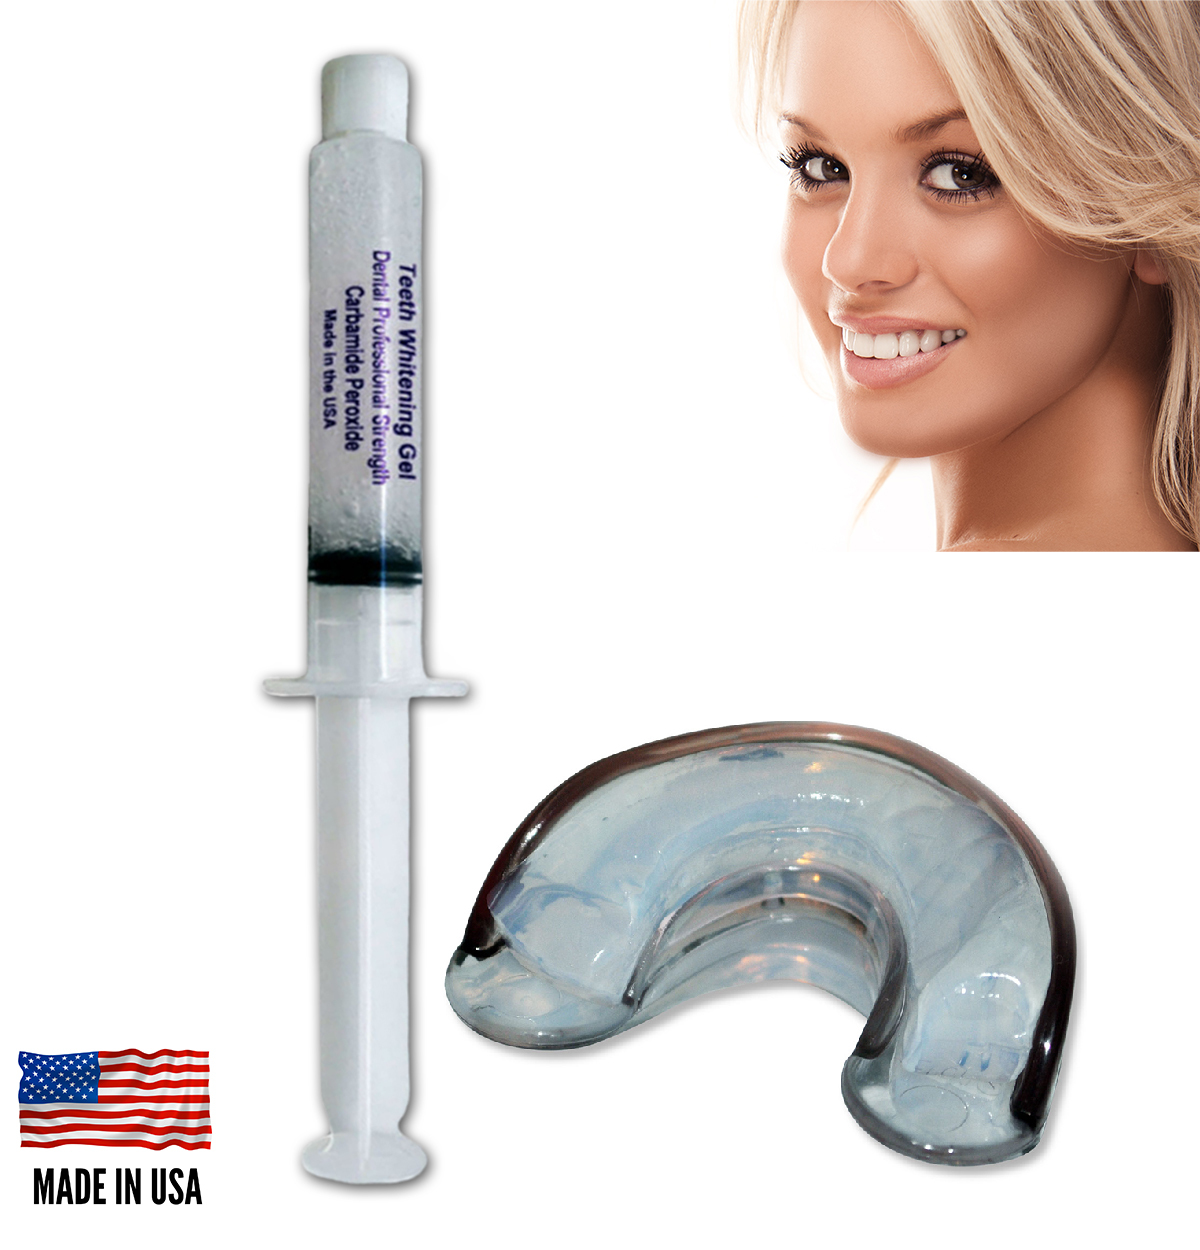 Teeth Whitening Gel Syringe 35% Tooth Bleaching + 1 FREE Silicone Mouth Tray ! ! - $9.95